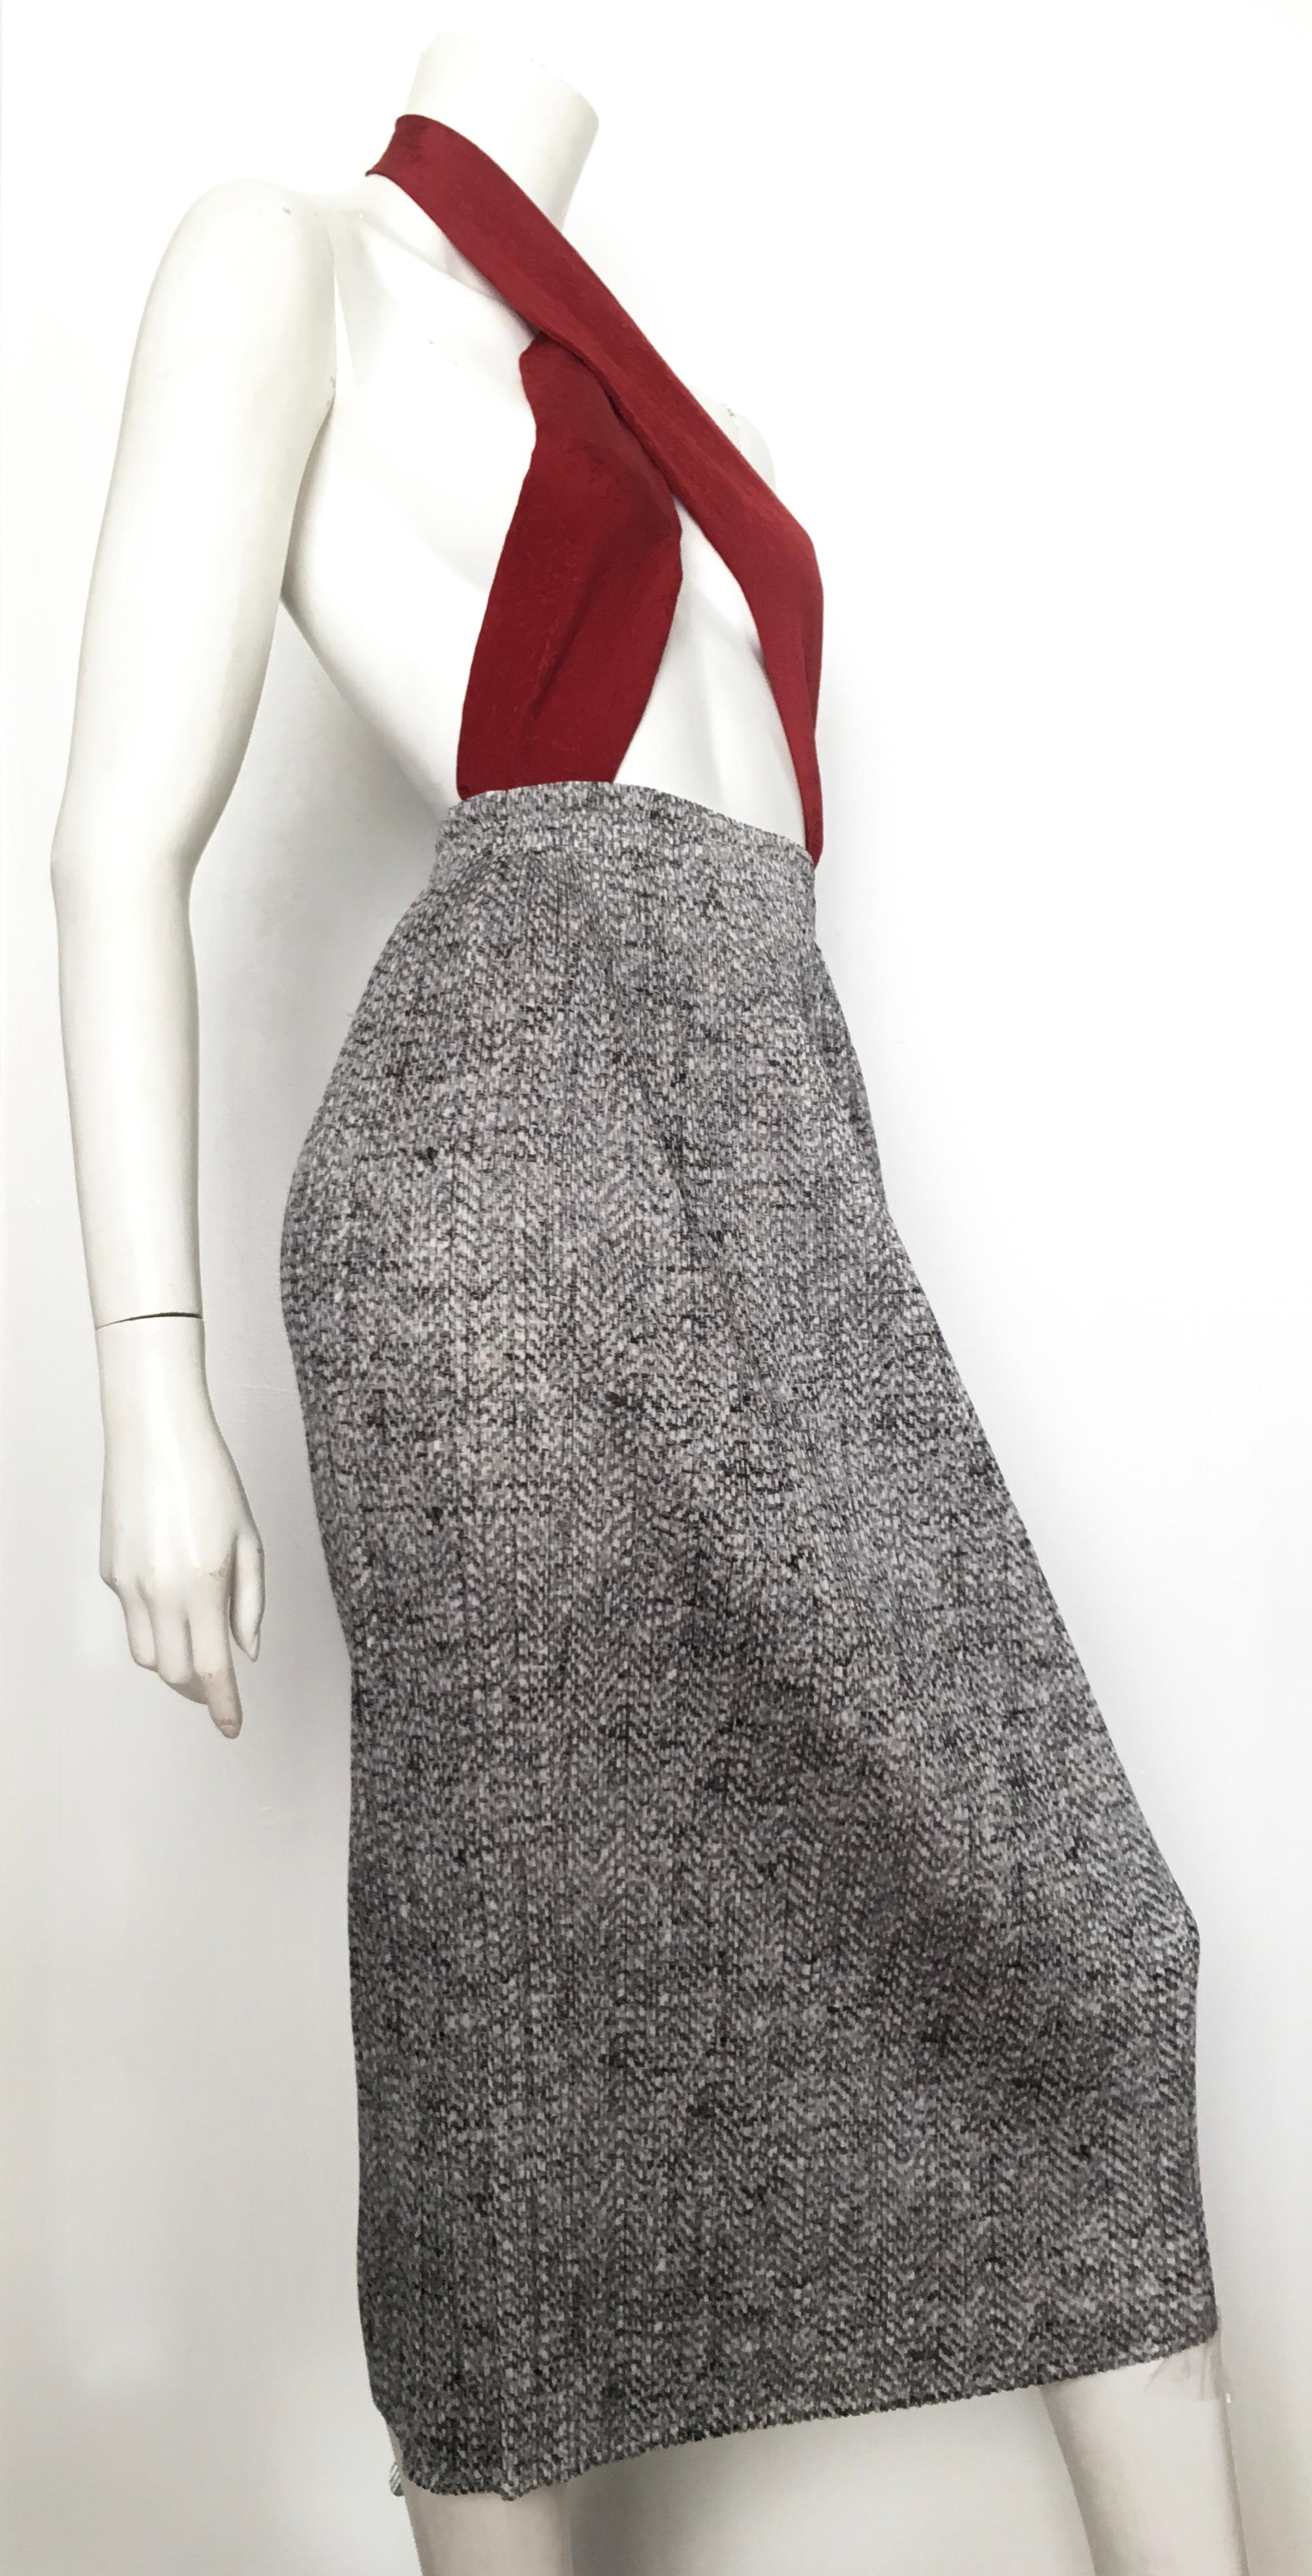 Issey Miyake Pleats Please 1990s Black & White Long Skirt Size Small. 7